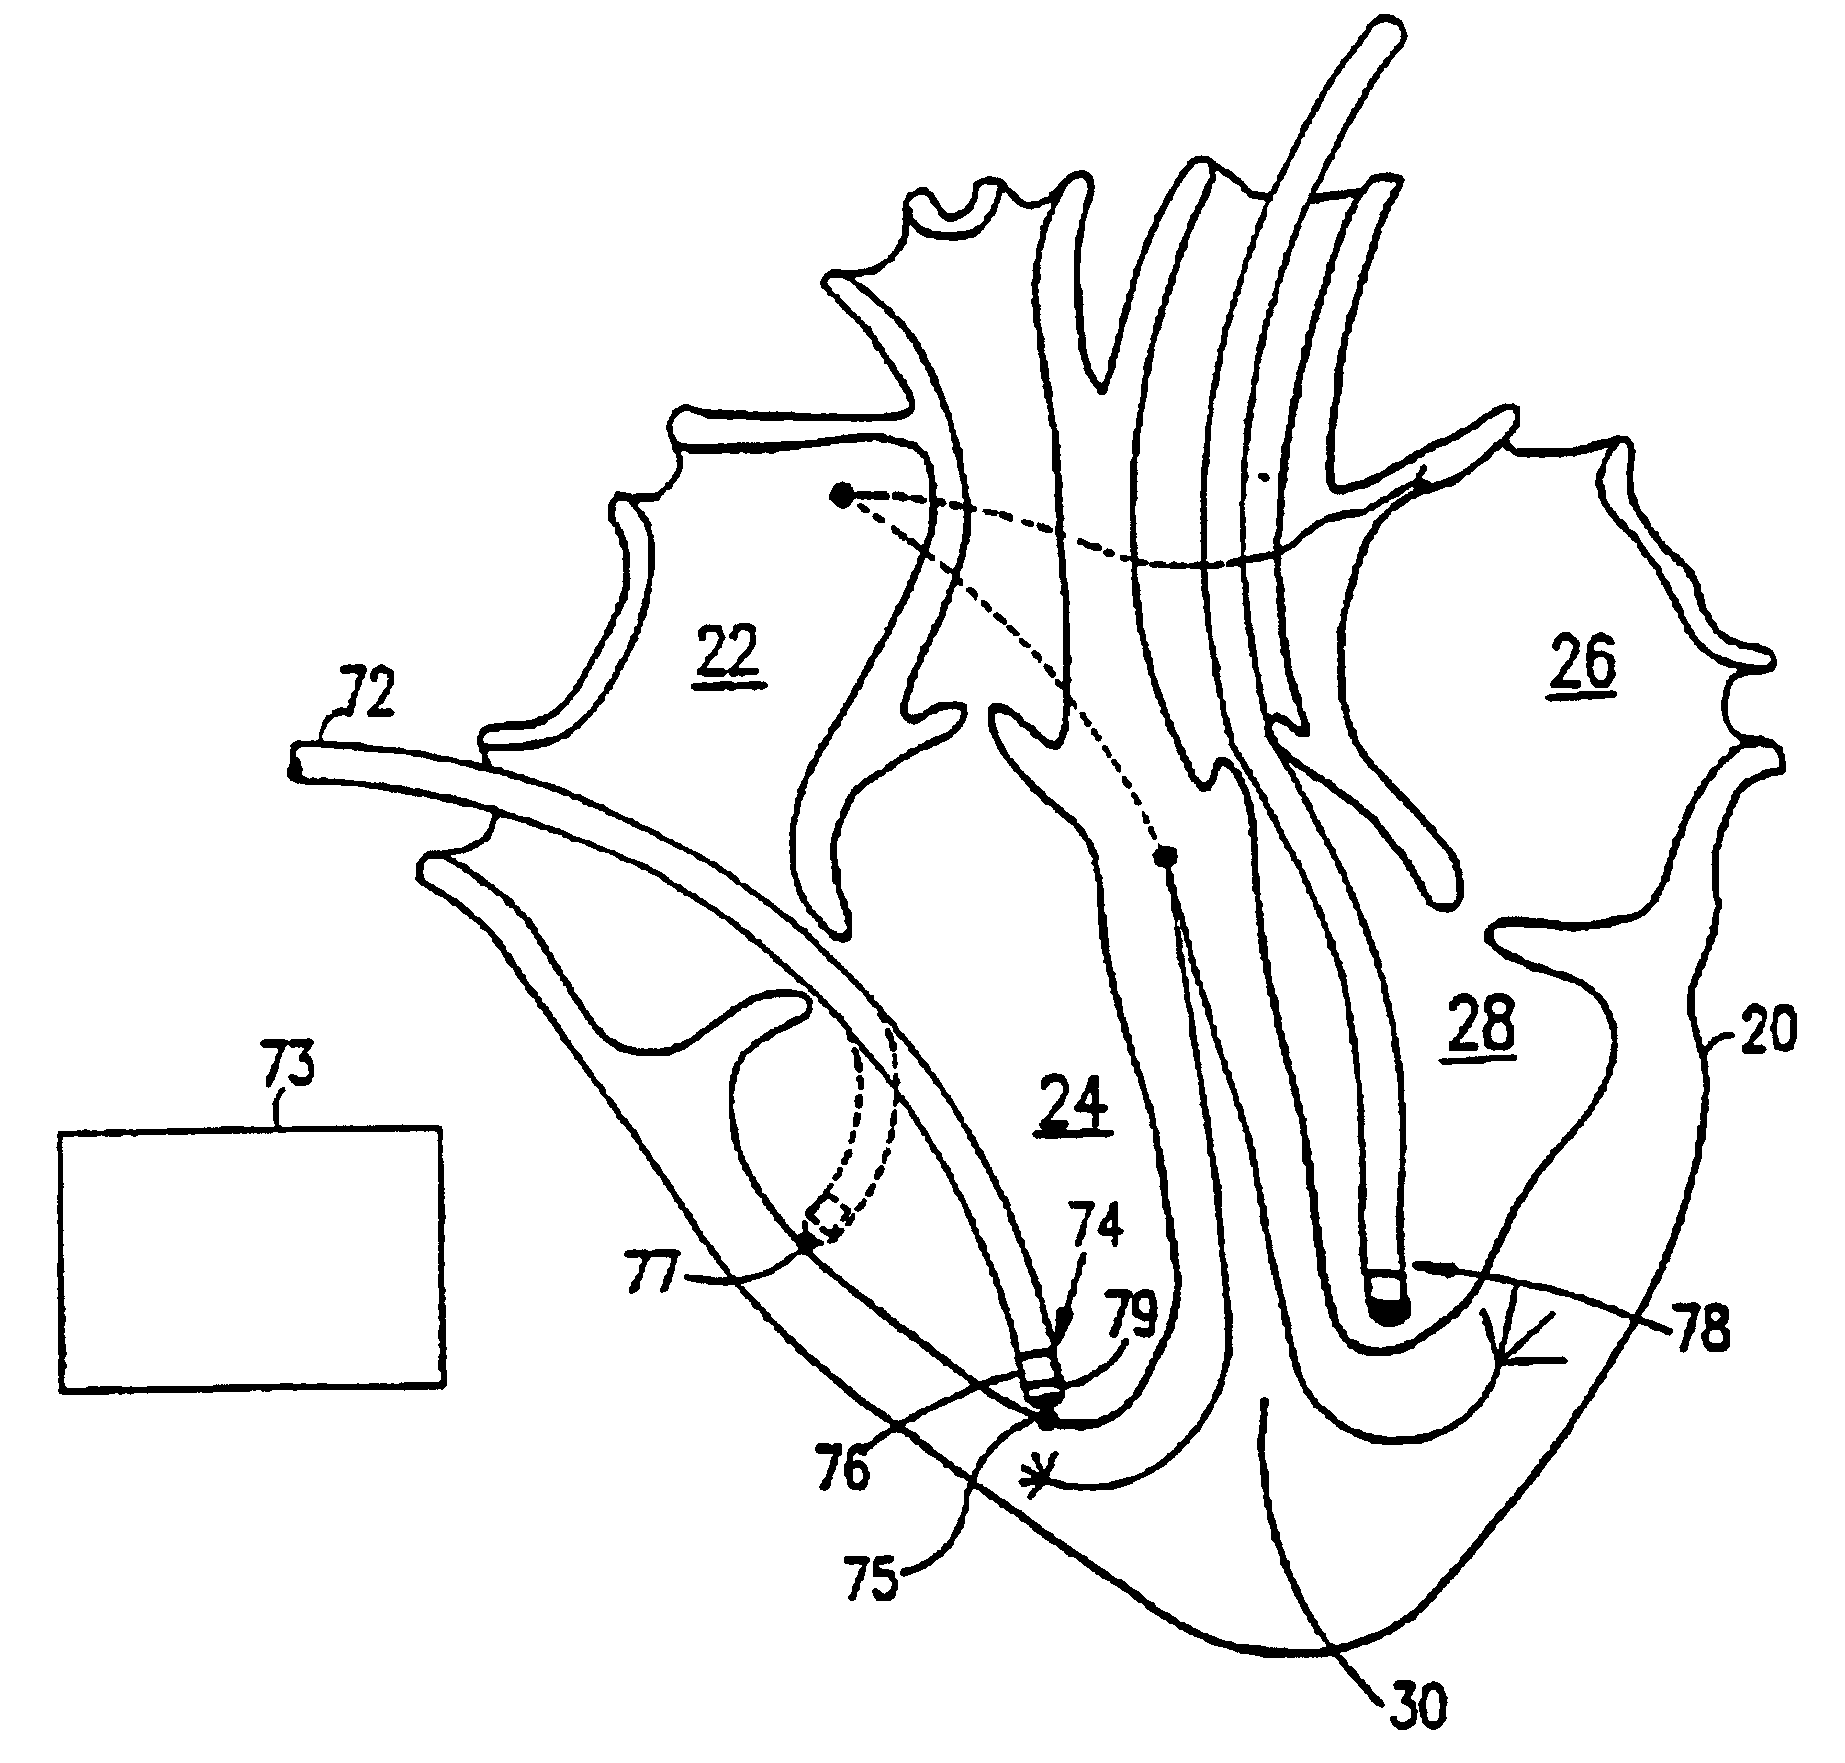 Method of pacing a heart using implantable device